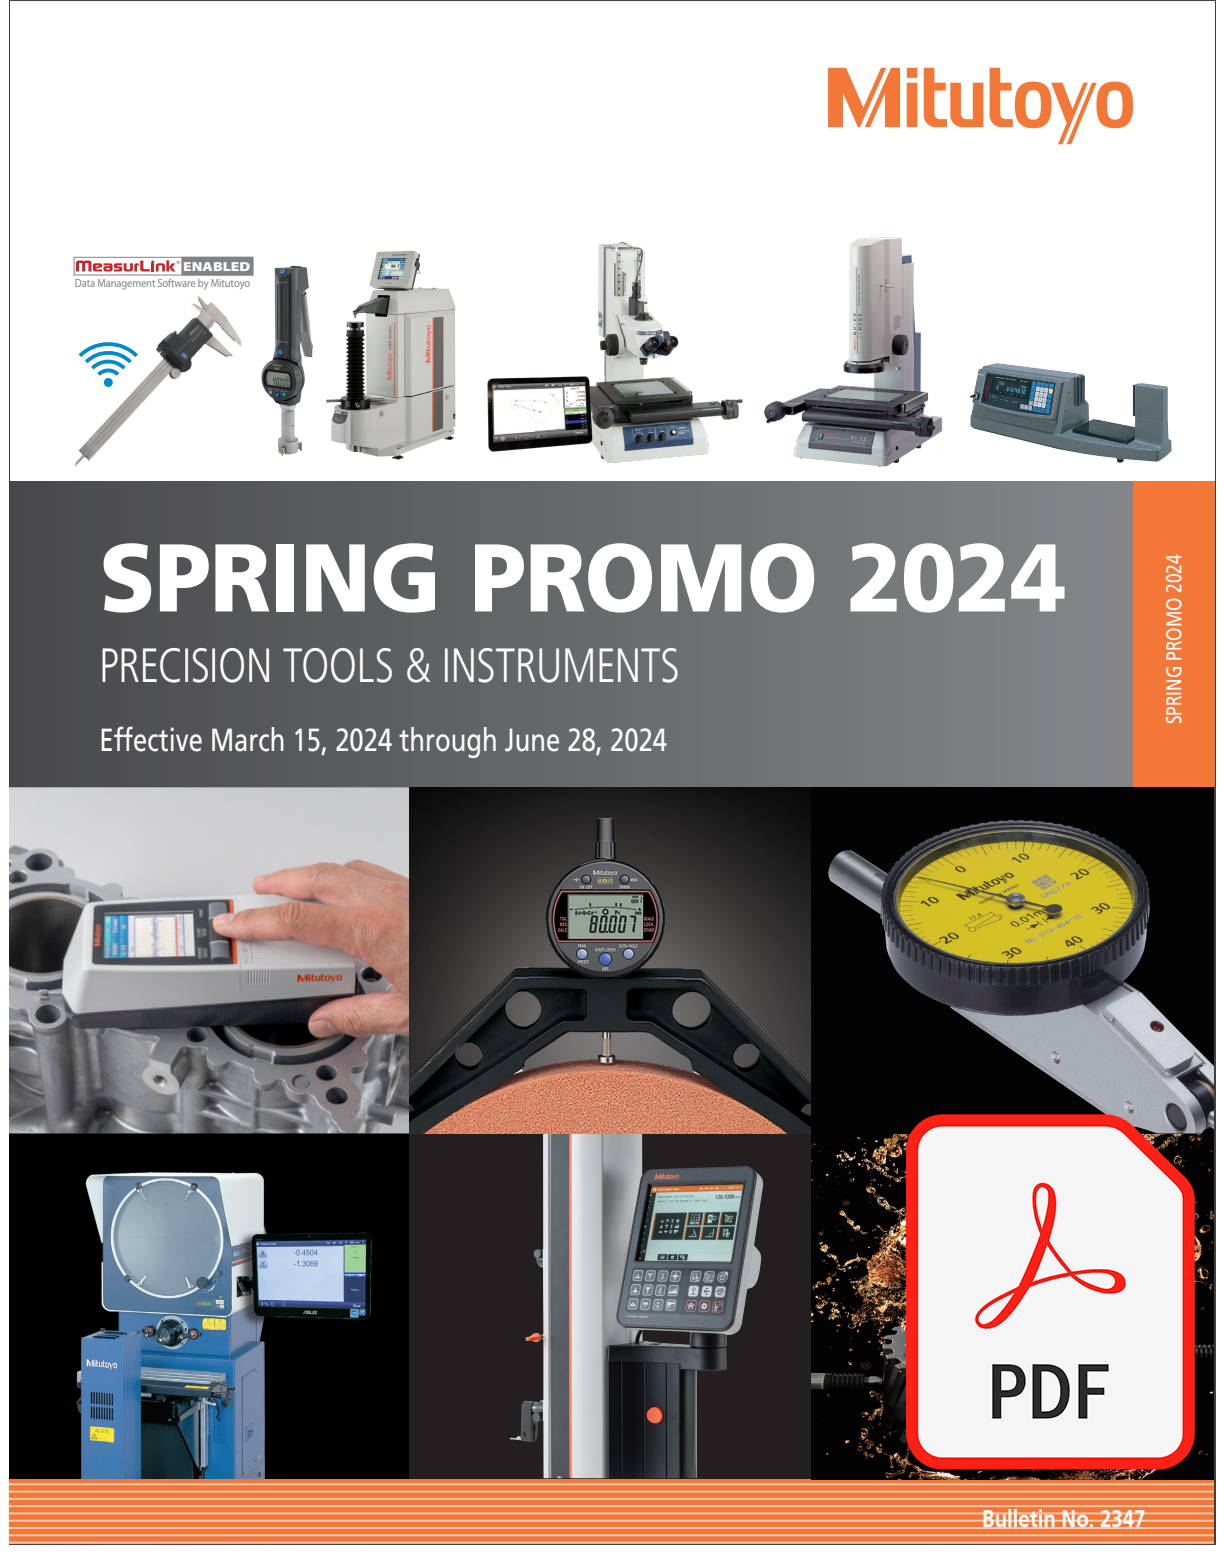 Mitutoyo Spring Promo 2024 PDF Full Price List at GreatGages.com